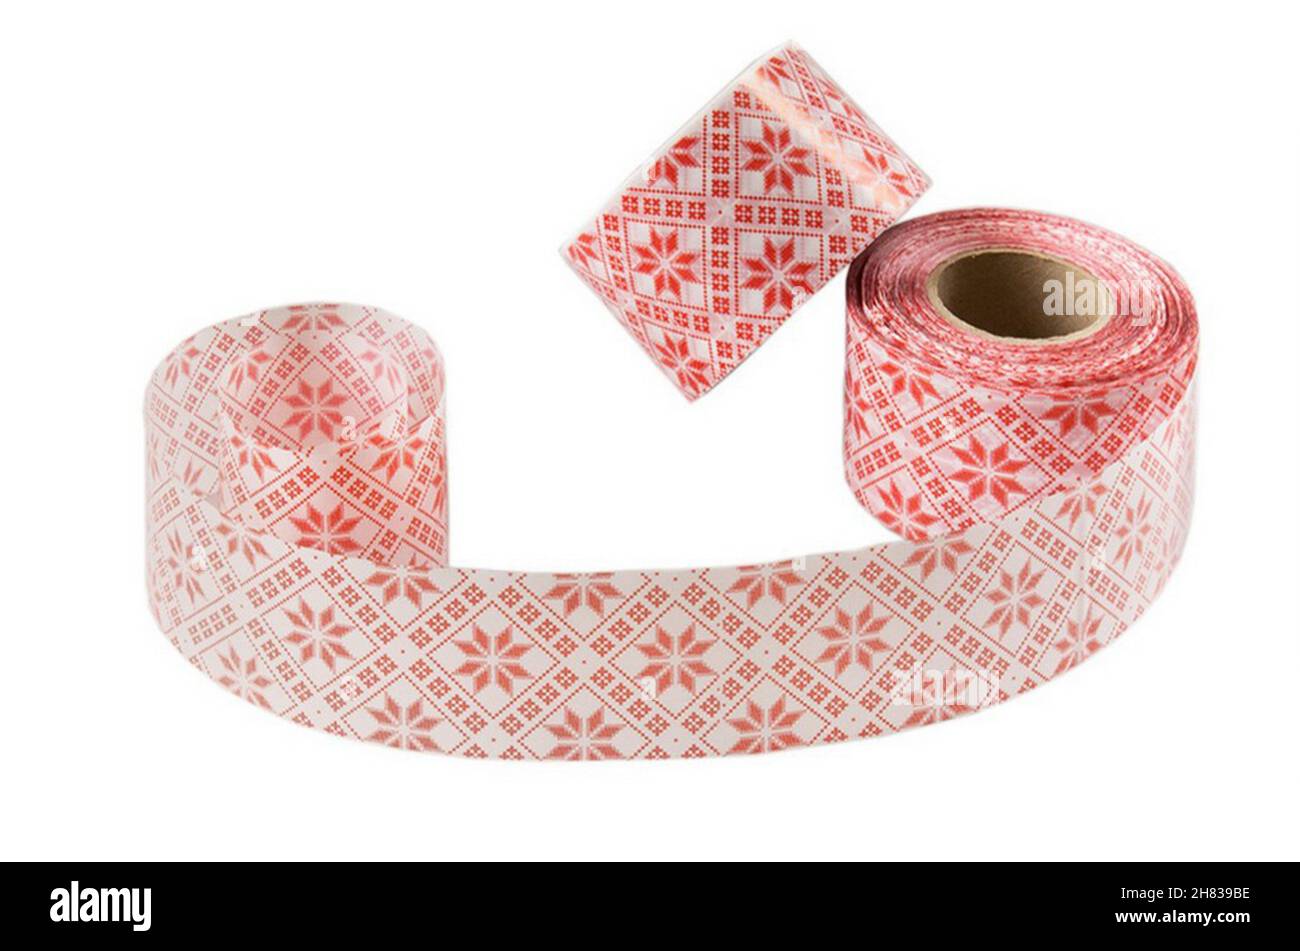 Curb tape decor for cakes with abstract red flowers pattern isolated over white background. Baking clipart, object photography Stock Photo